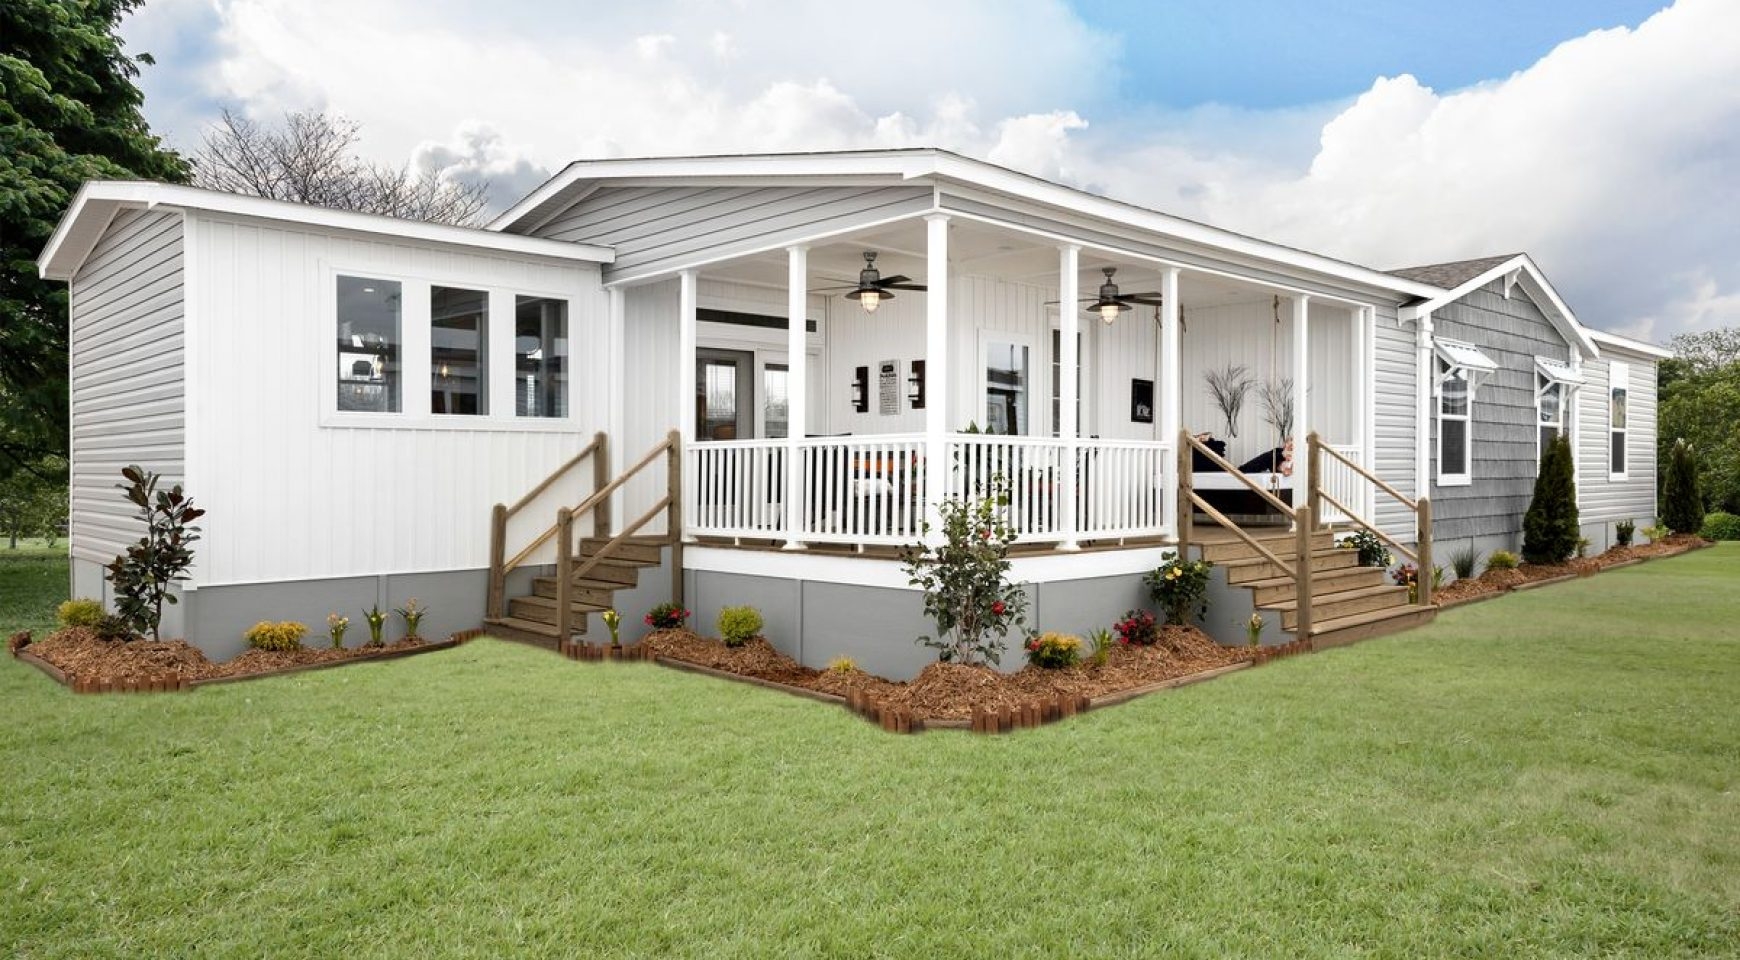 8 Images Pictures Of Double Wide Mobile Homes With Porches